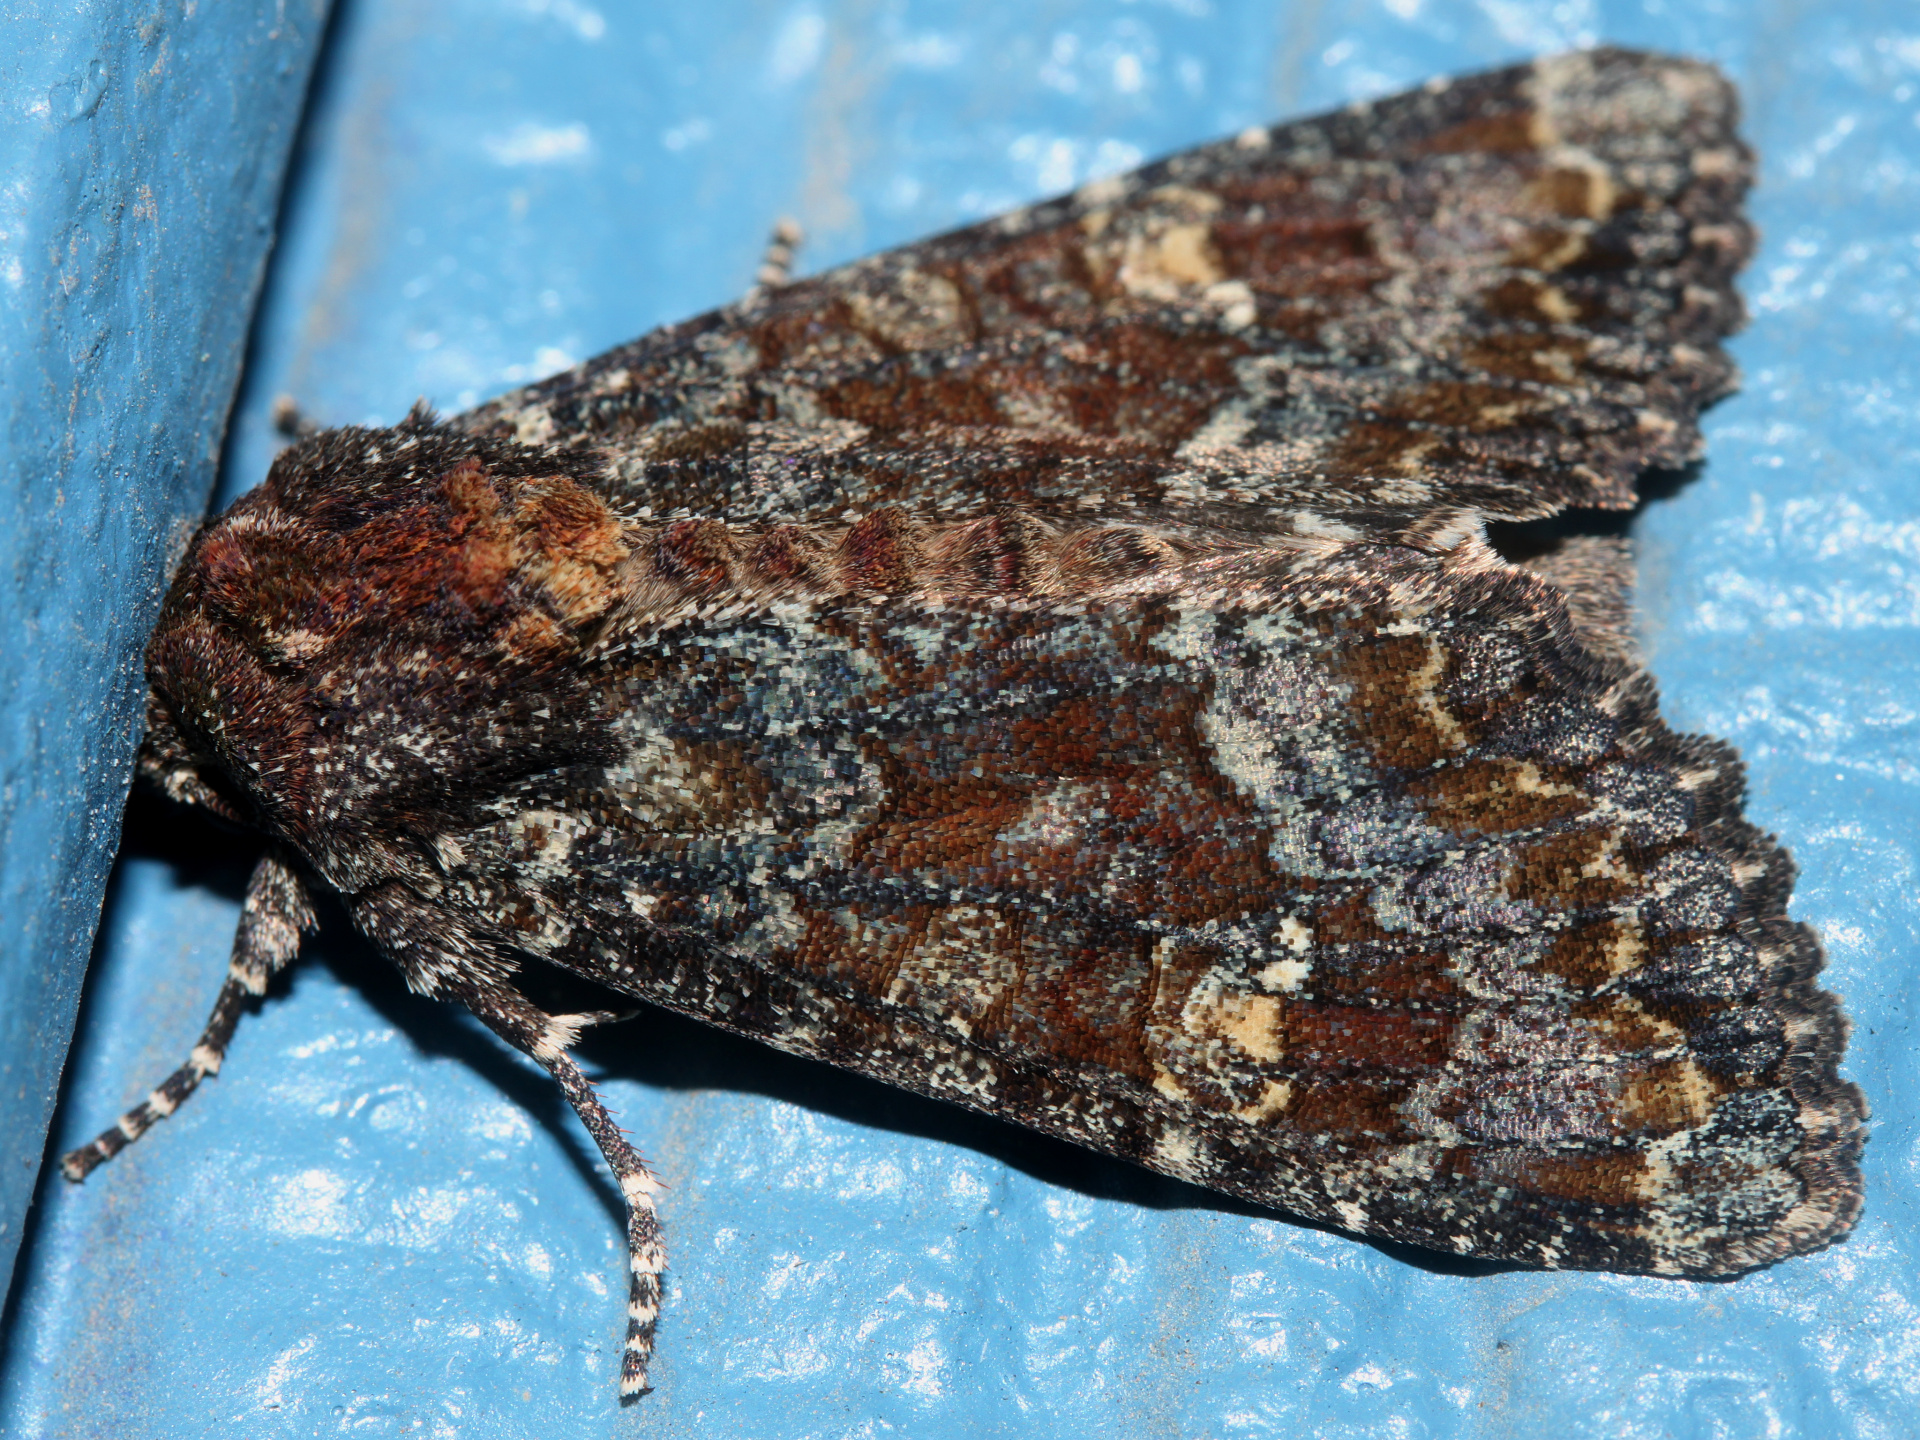 Apamea amputatrix (Travels » US Trip 3: The Roads Not Taken » Animals » Insects » Butterfies and Moths » Noctuidae)